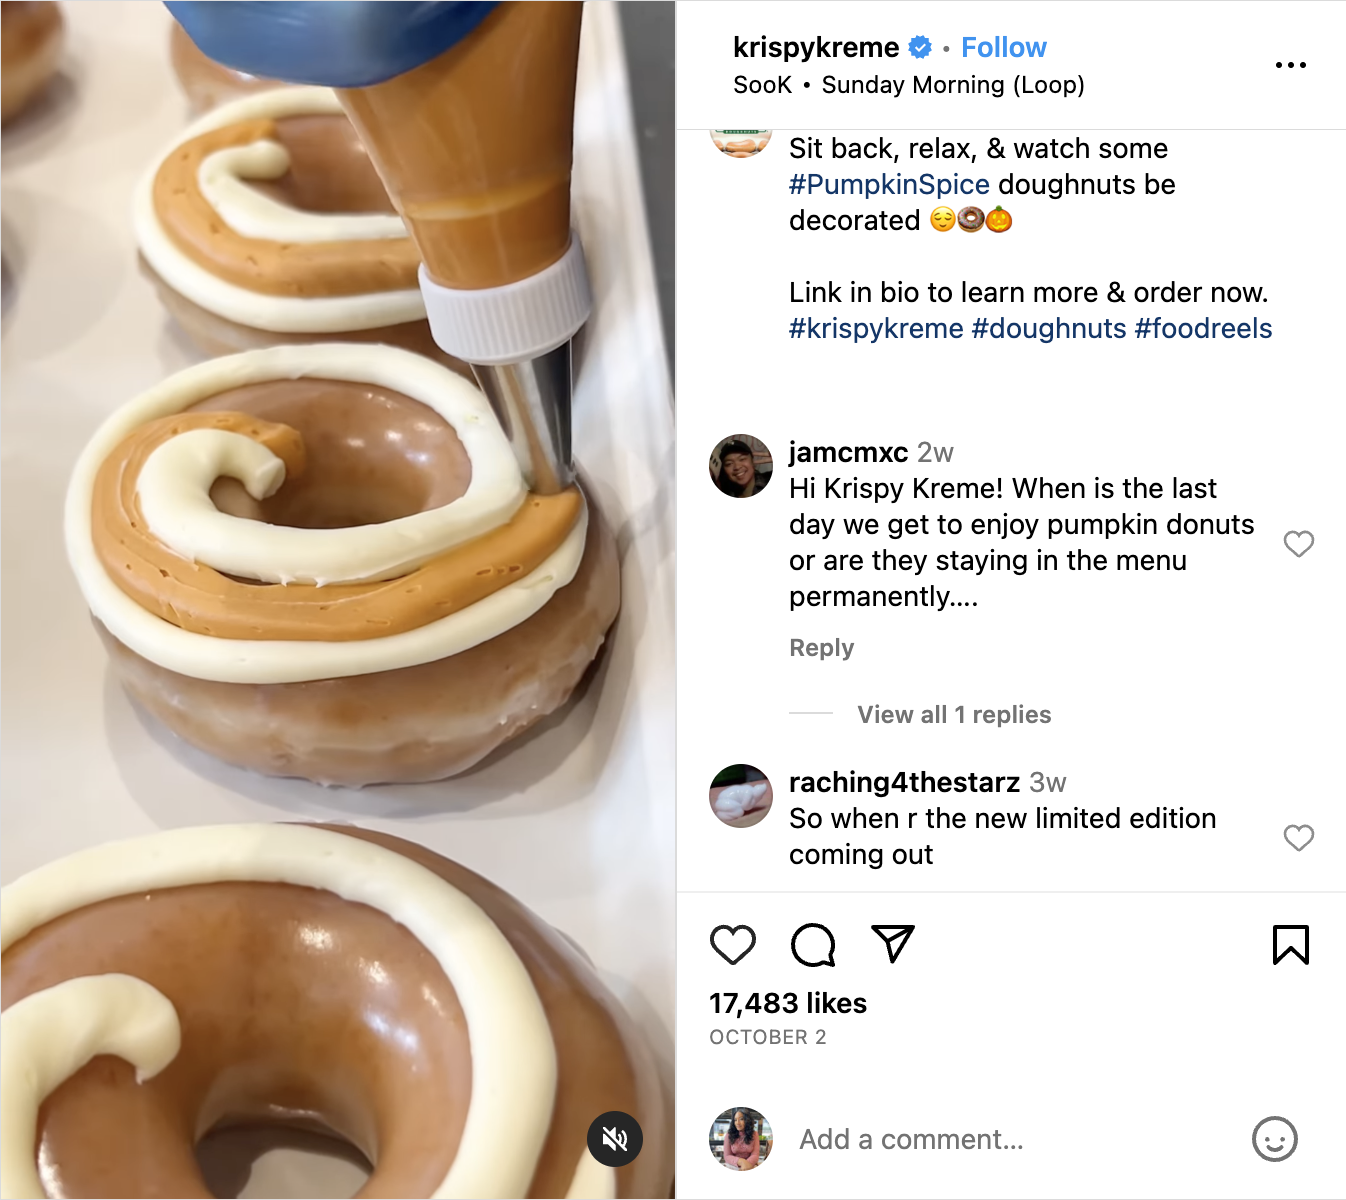 A Krispy Kreme Instagram Reel showing how to make their new limited edition pumpkin spice doughnut. There are several comments asking about the availability of the new product.